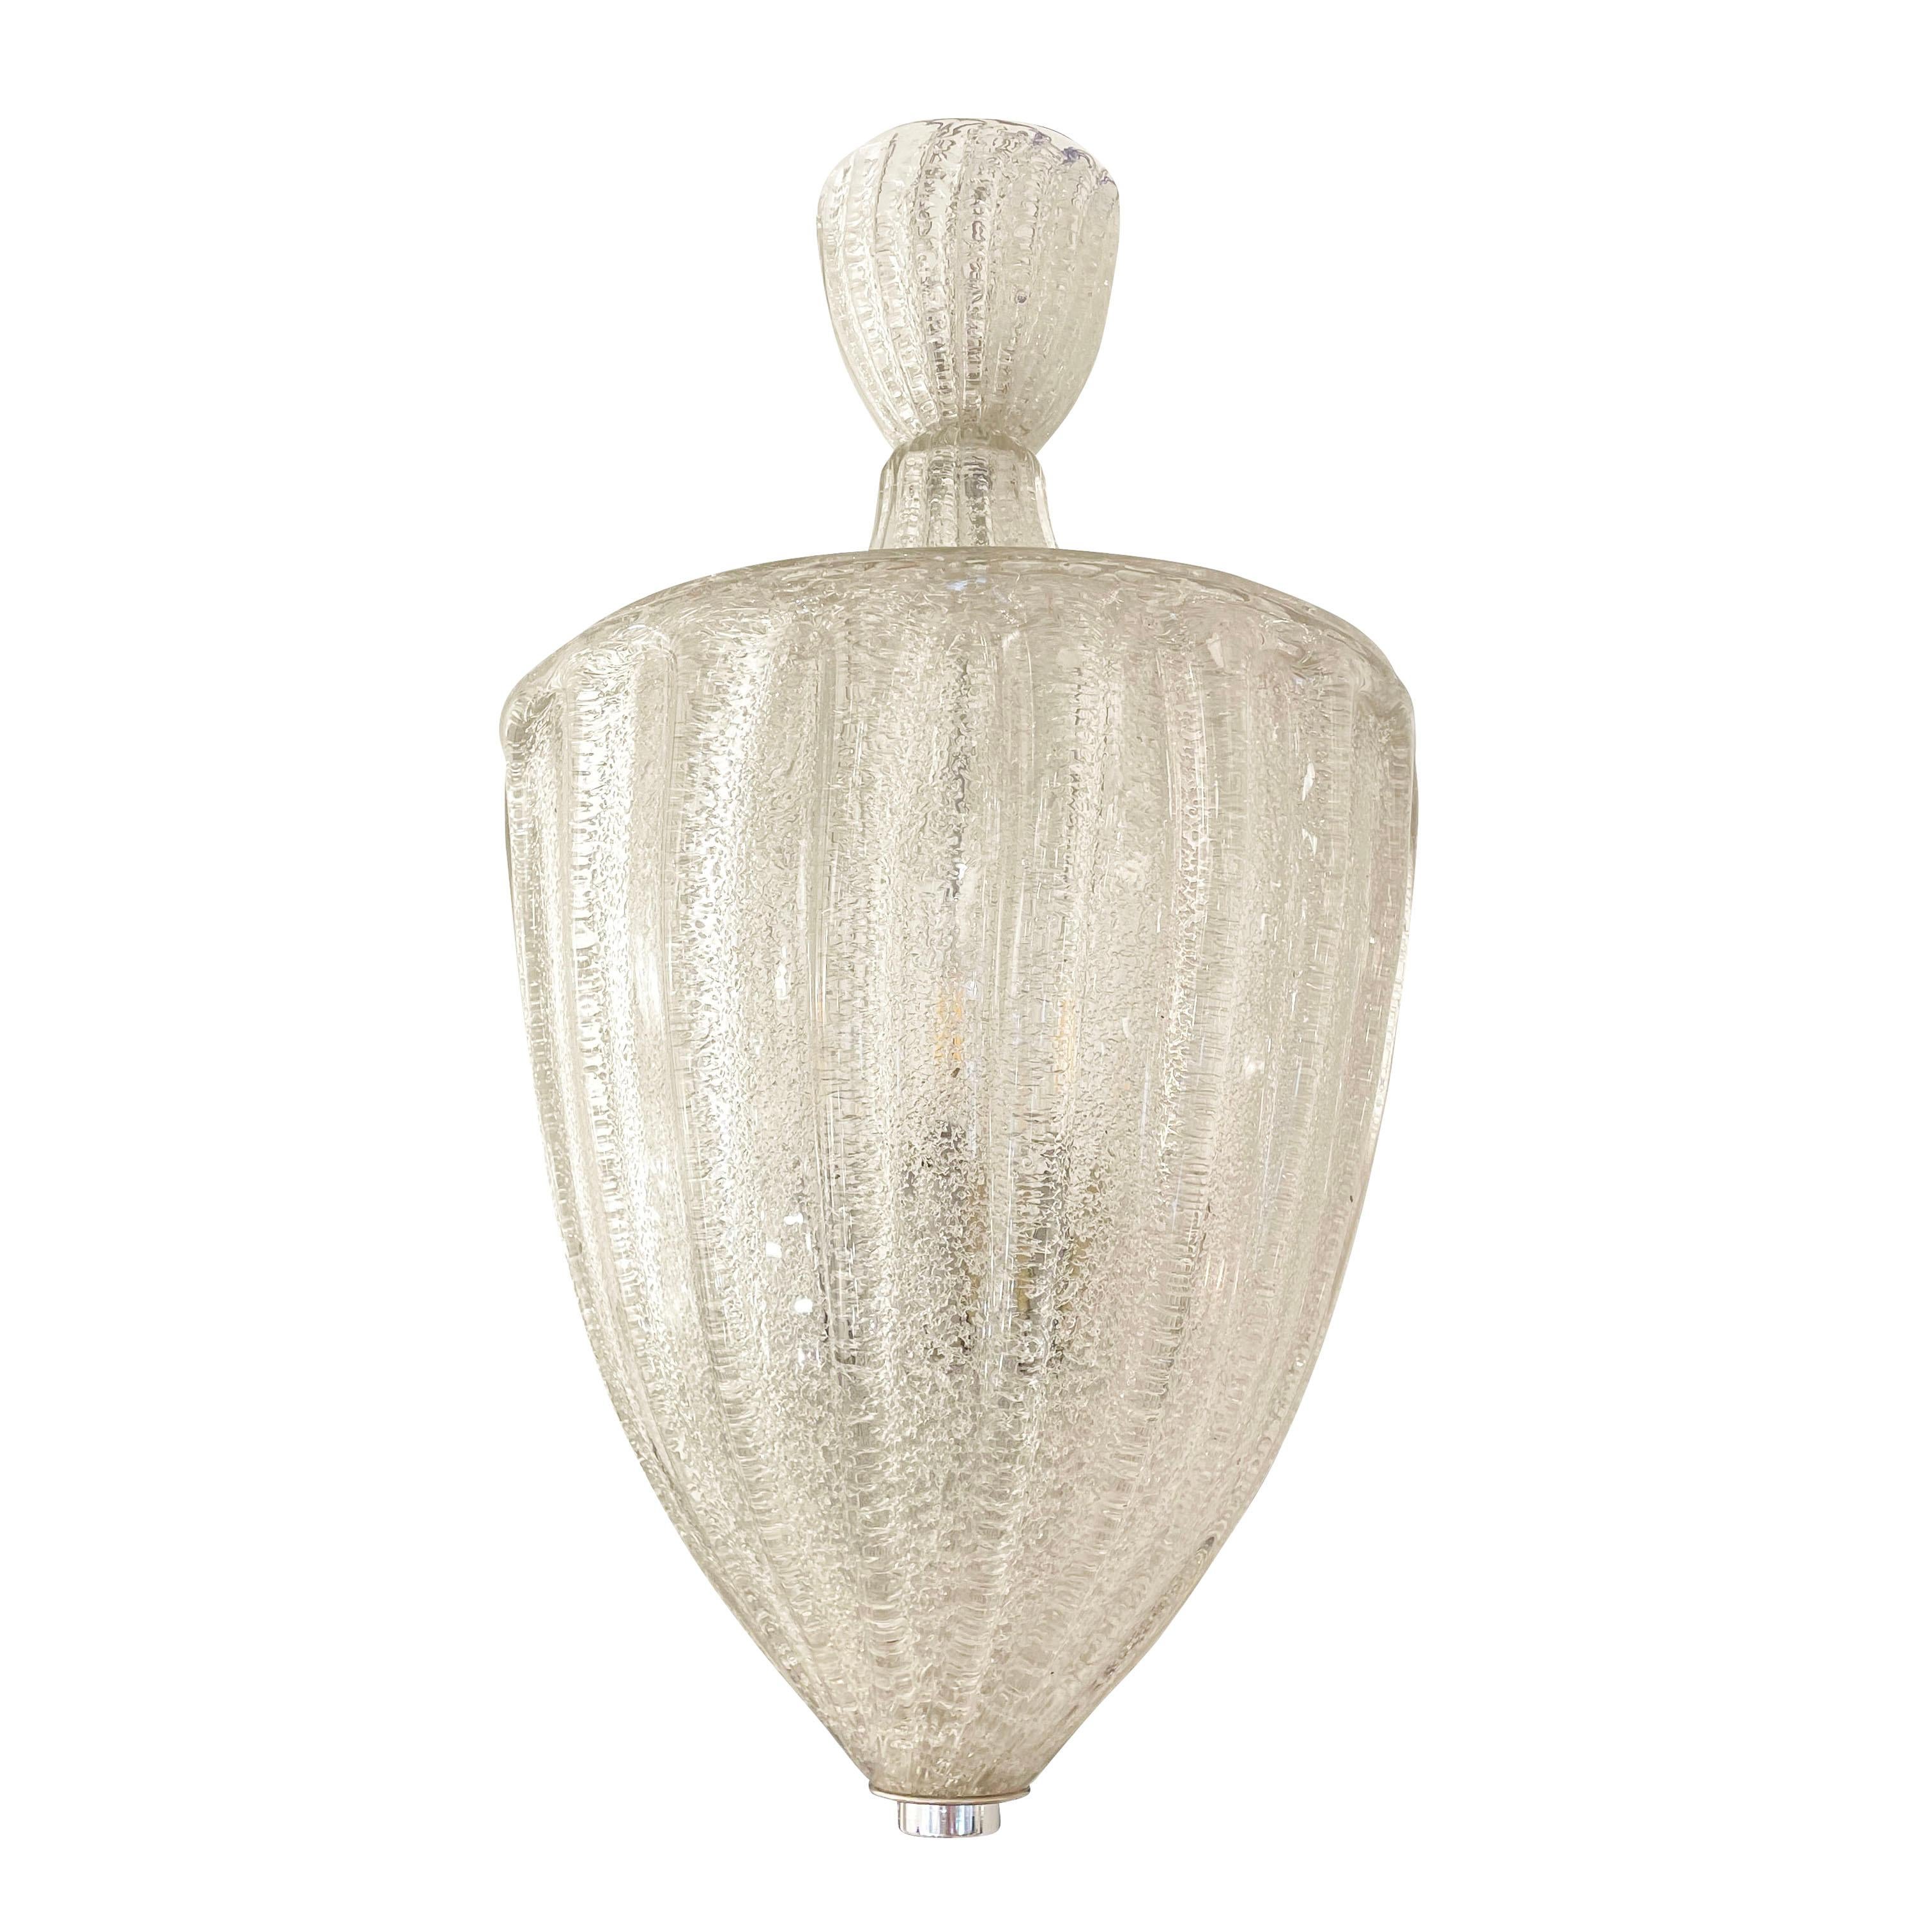 Italian mid-century murano glass pendant blown in a way that it is ribbed on the outside and textured on the inside. Composed of a main shade with nickel hardware and closed at the top with a glass lid and canopy. Holds two E26